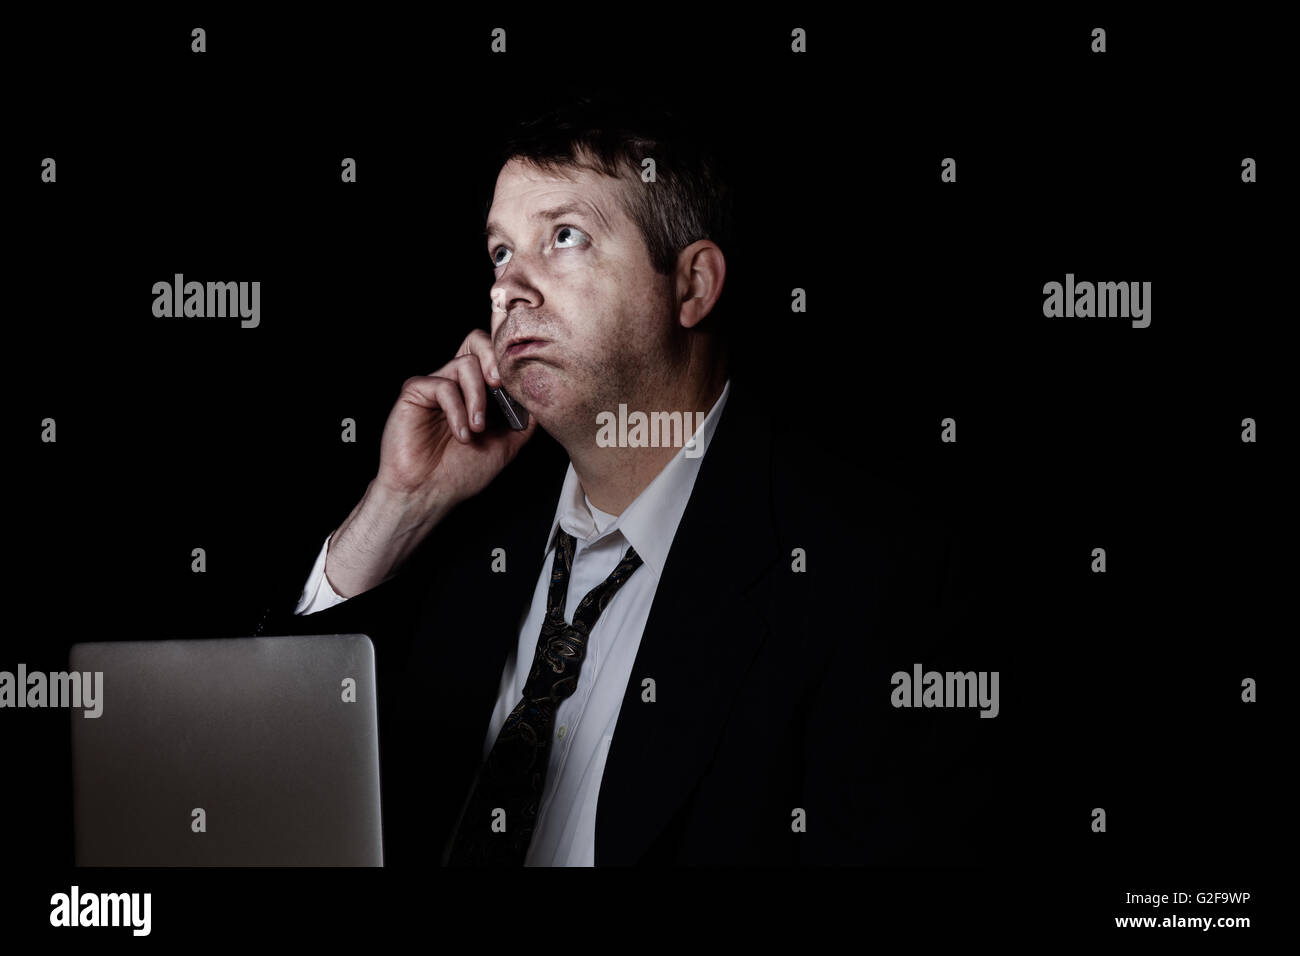 Side view of stressed business man on cell phone while working.  Dark background with light on face. Stock Photo